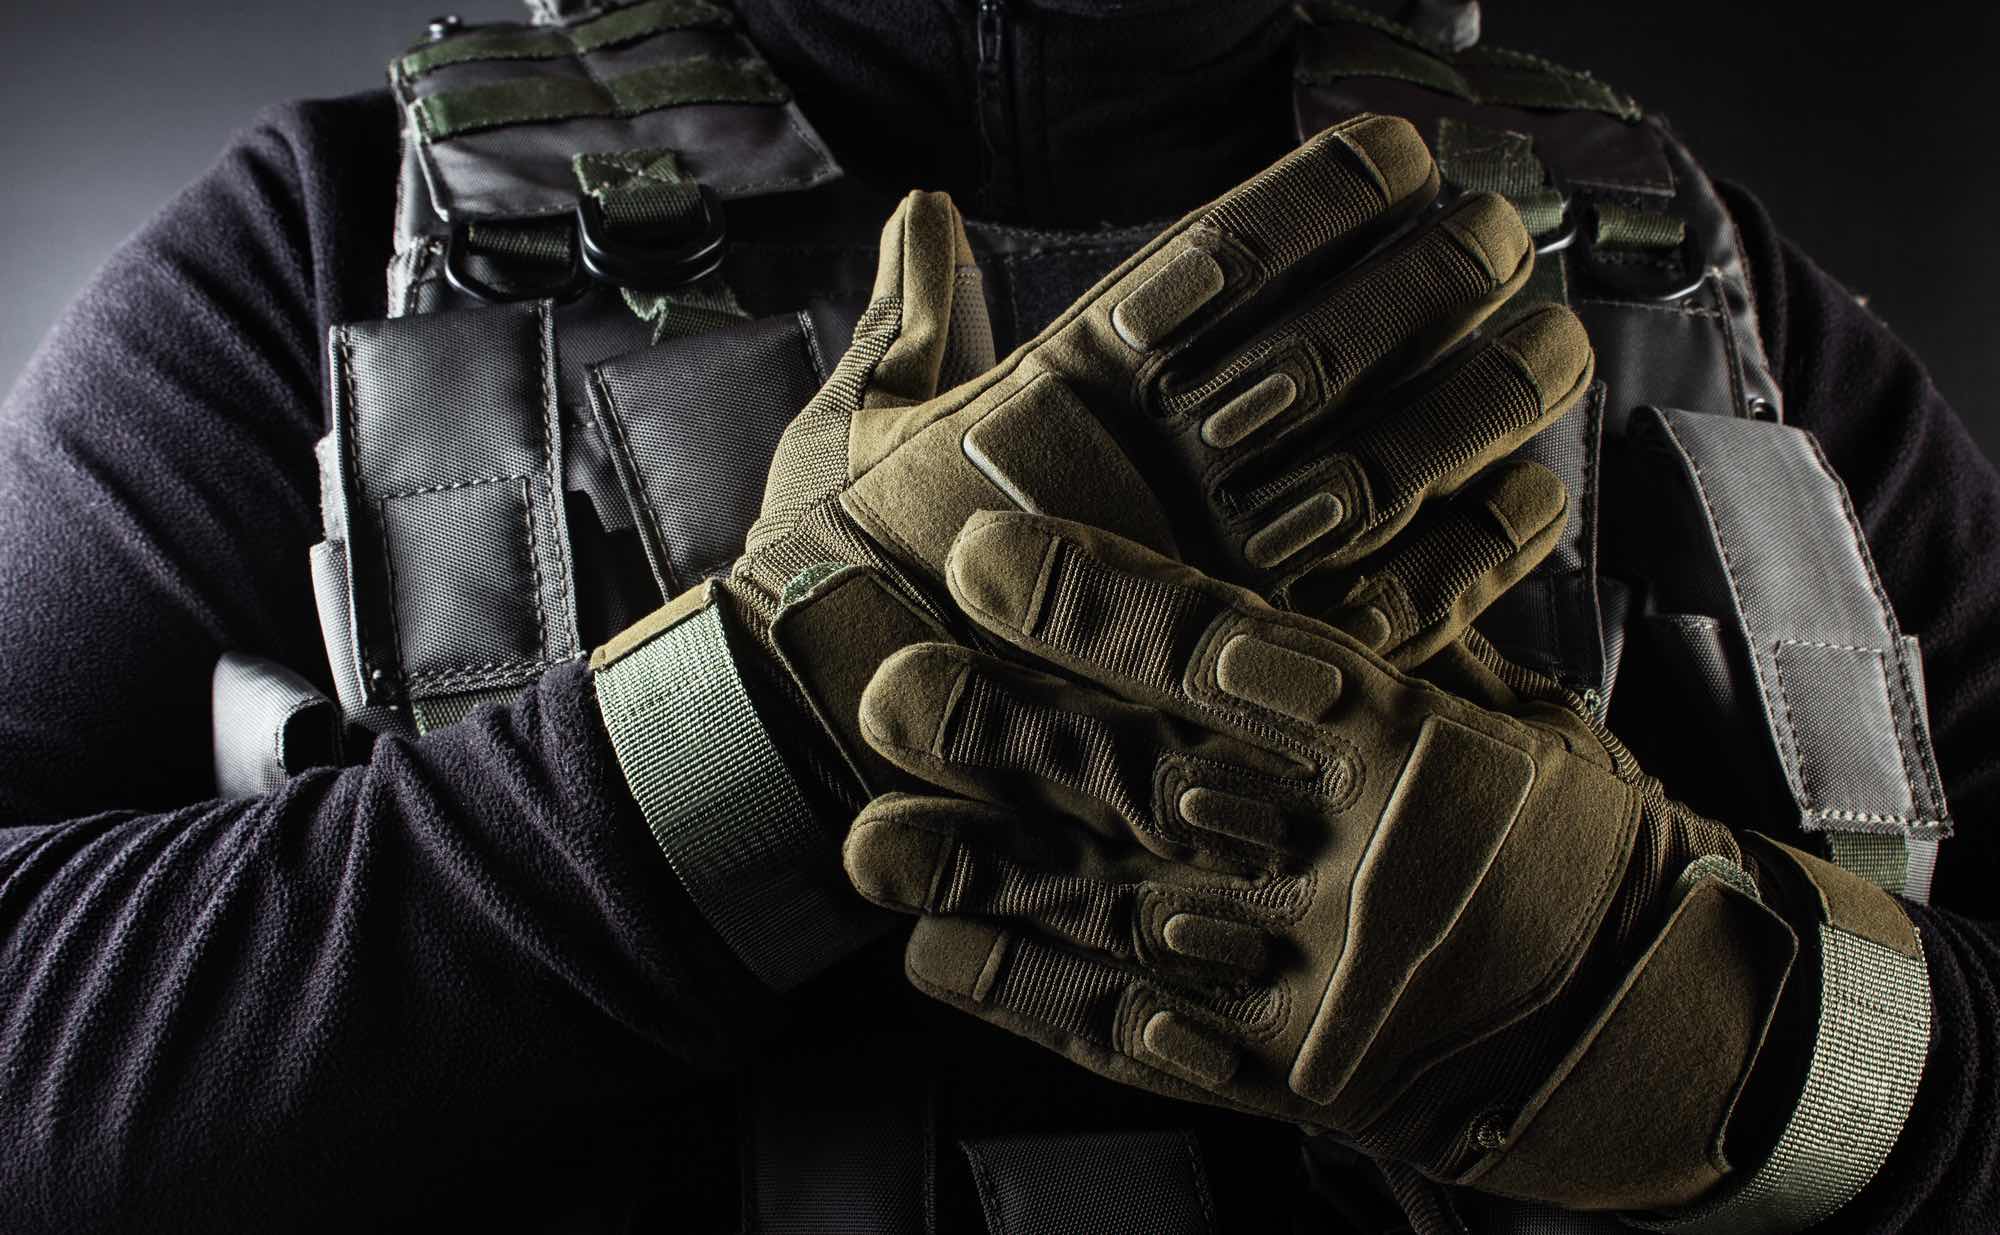 tactical gloves - Playground